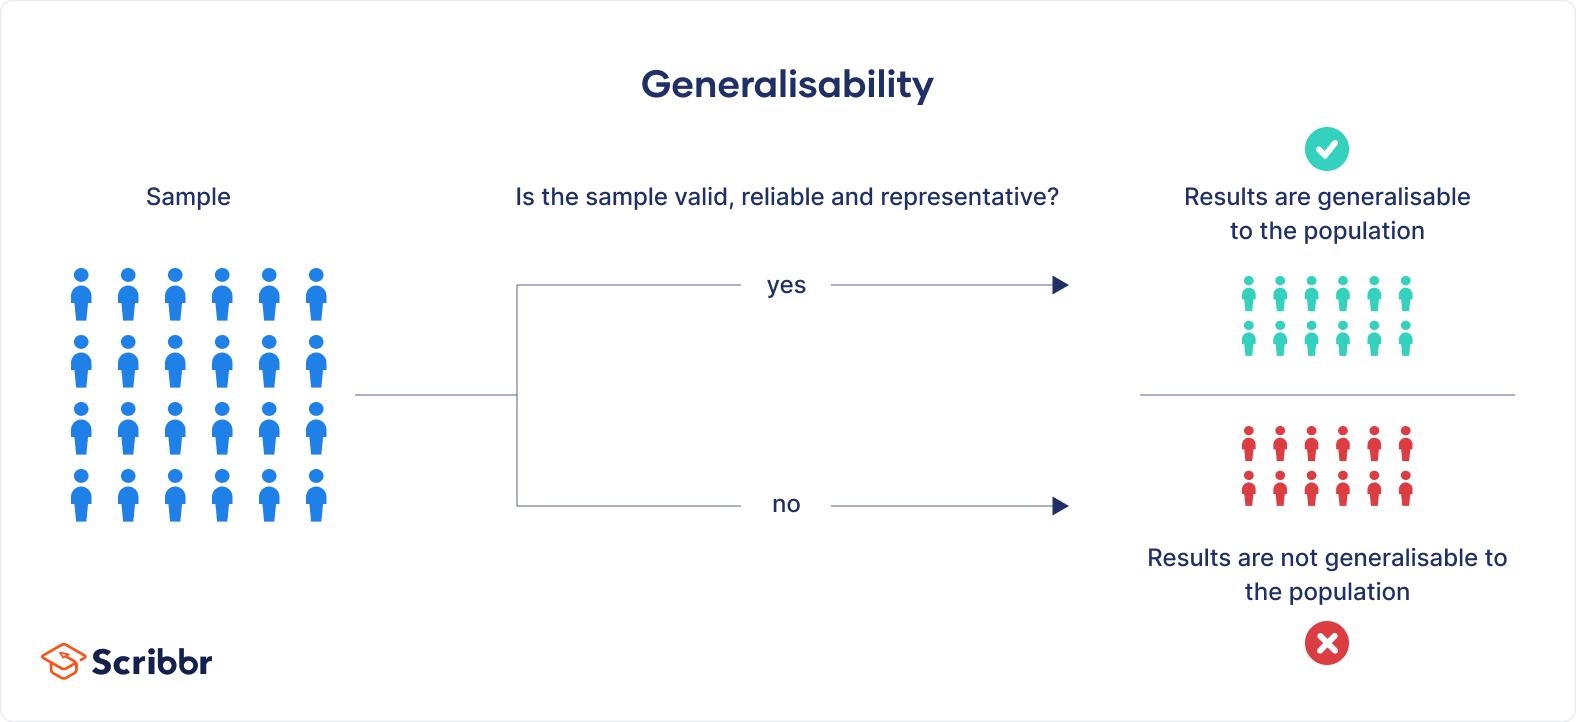 What is generalisability?